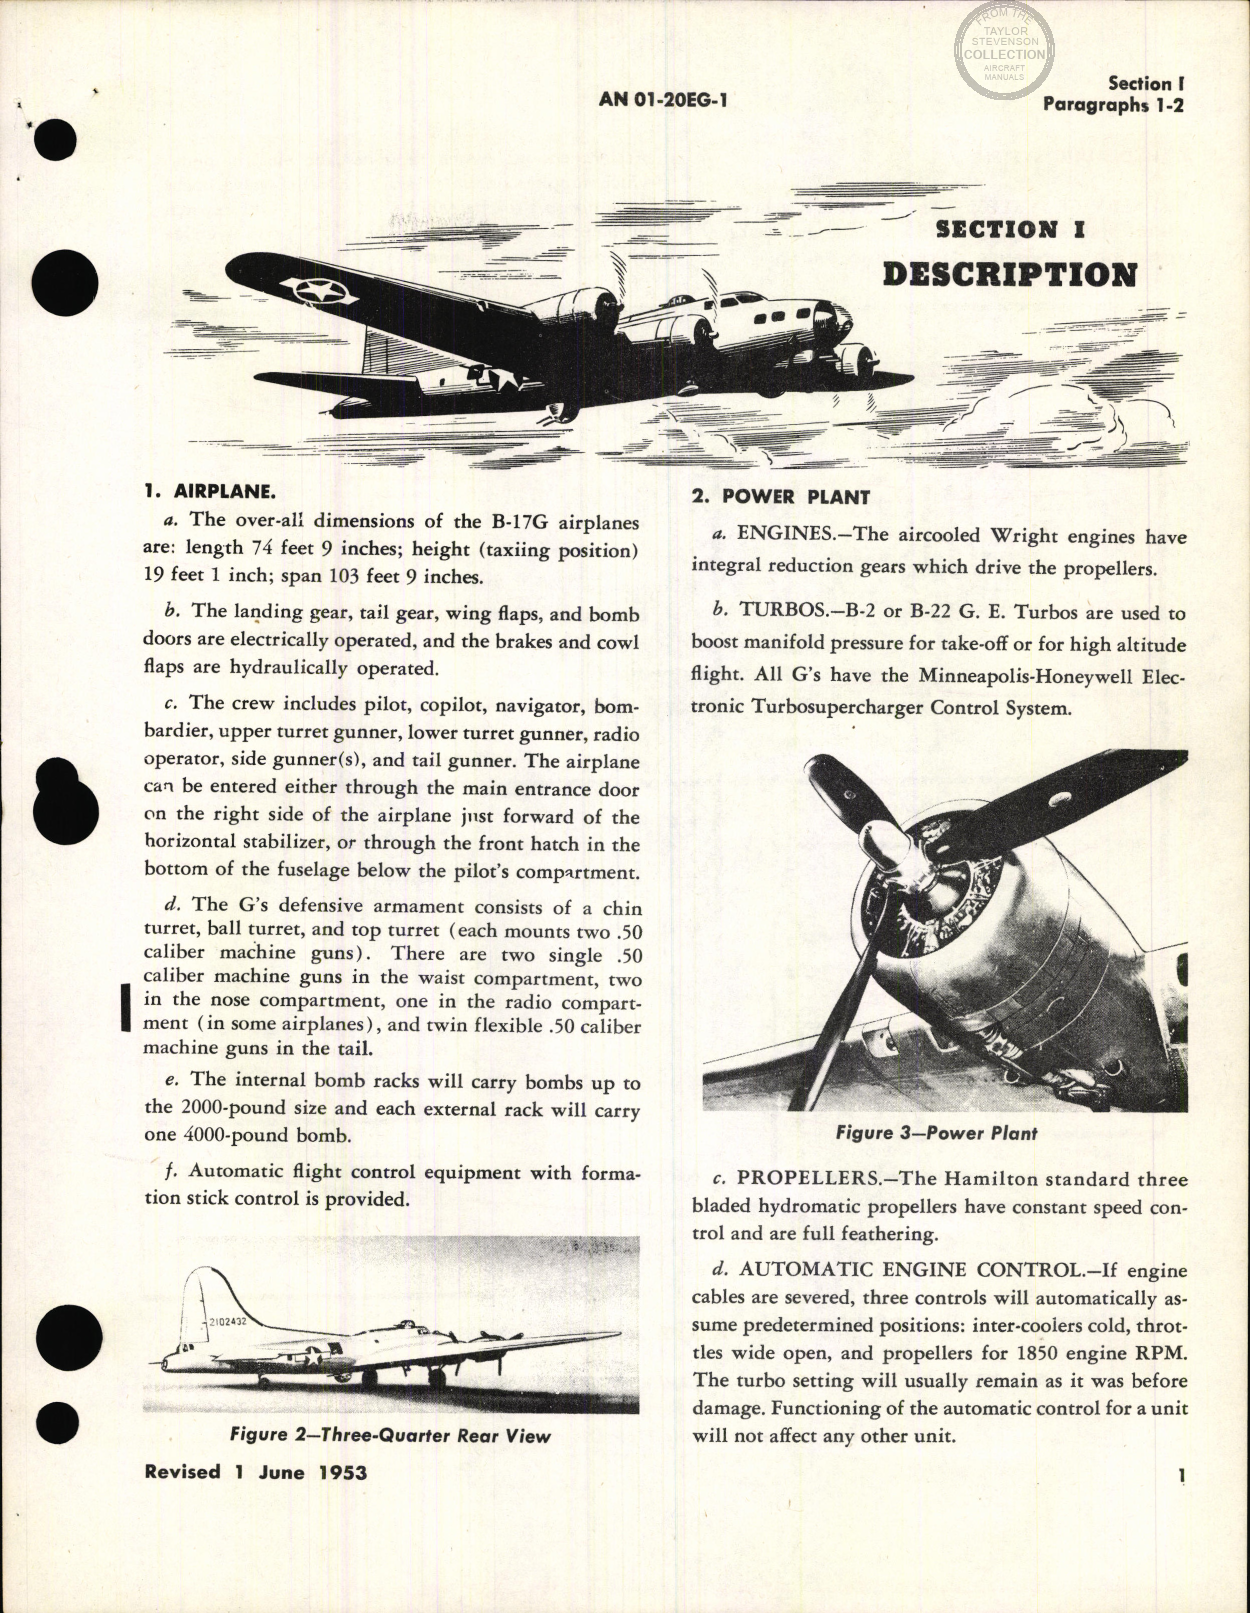 Sample page 7 from AirCorps Library document: Flight Handbook for B-17G, PB-1E Aircraft